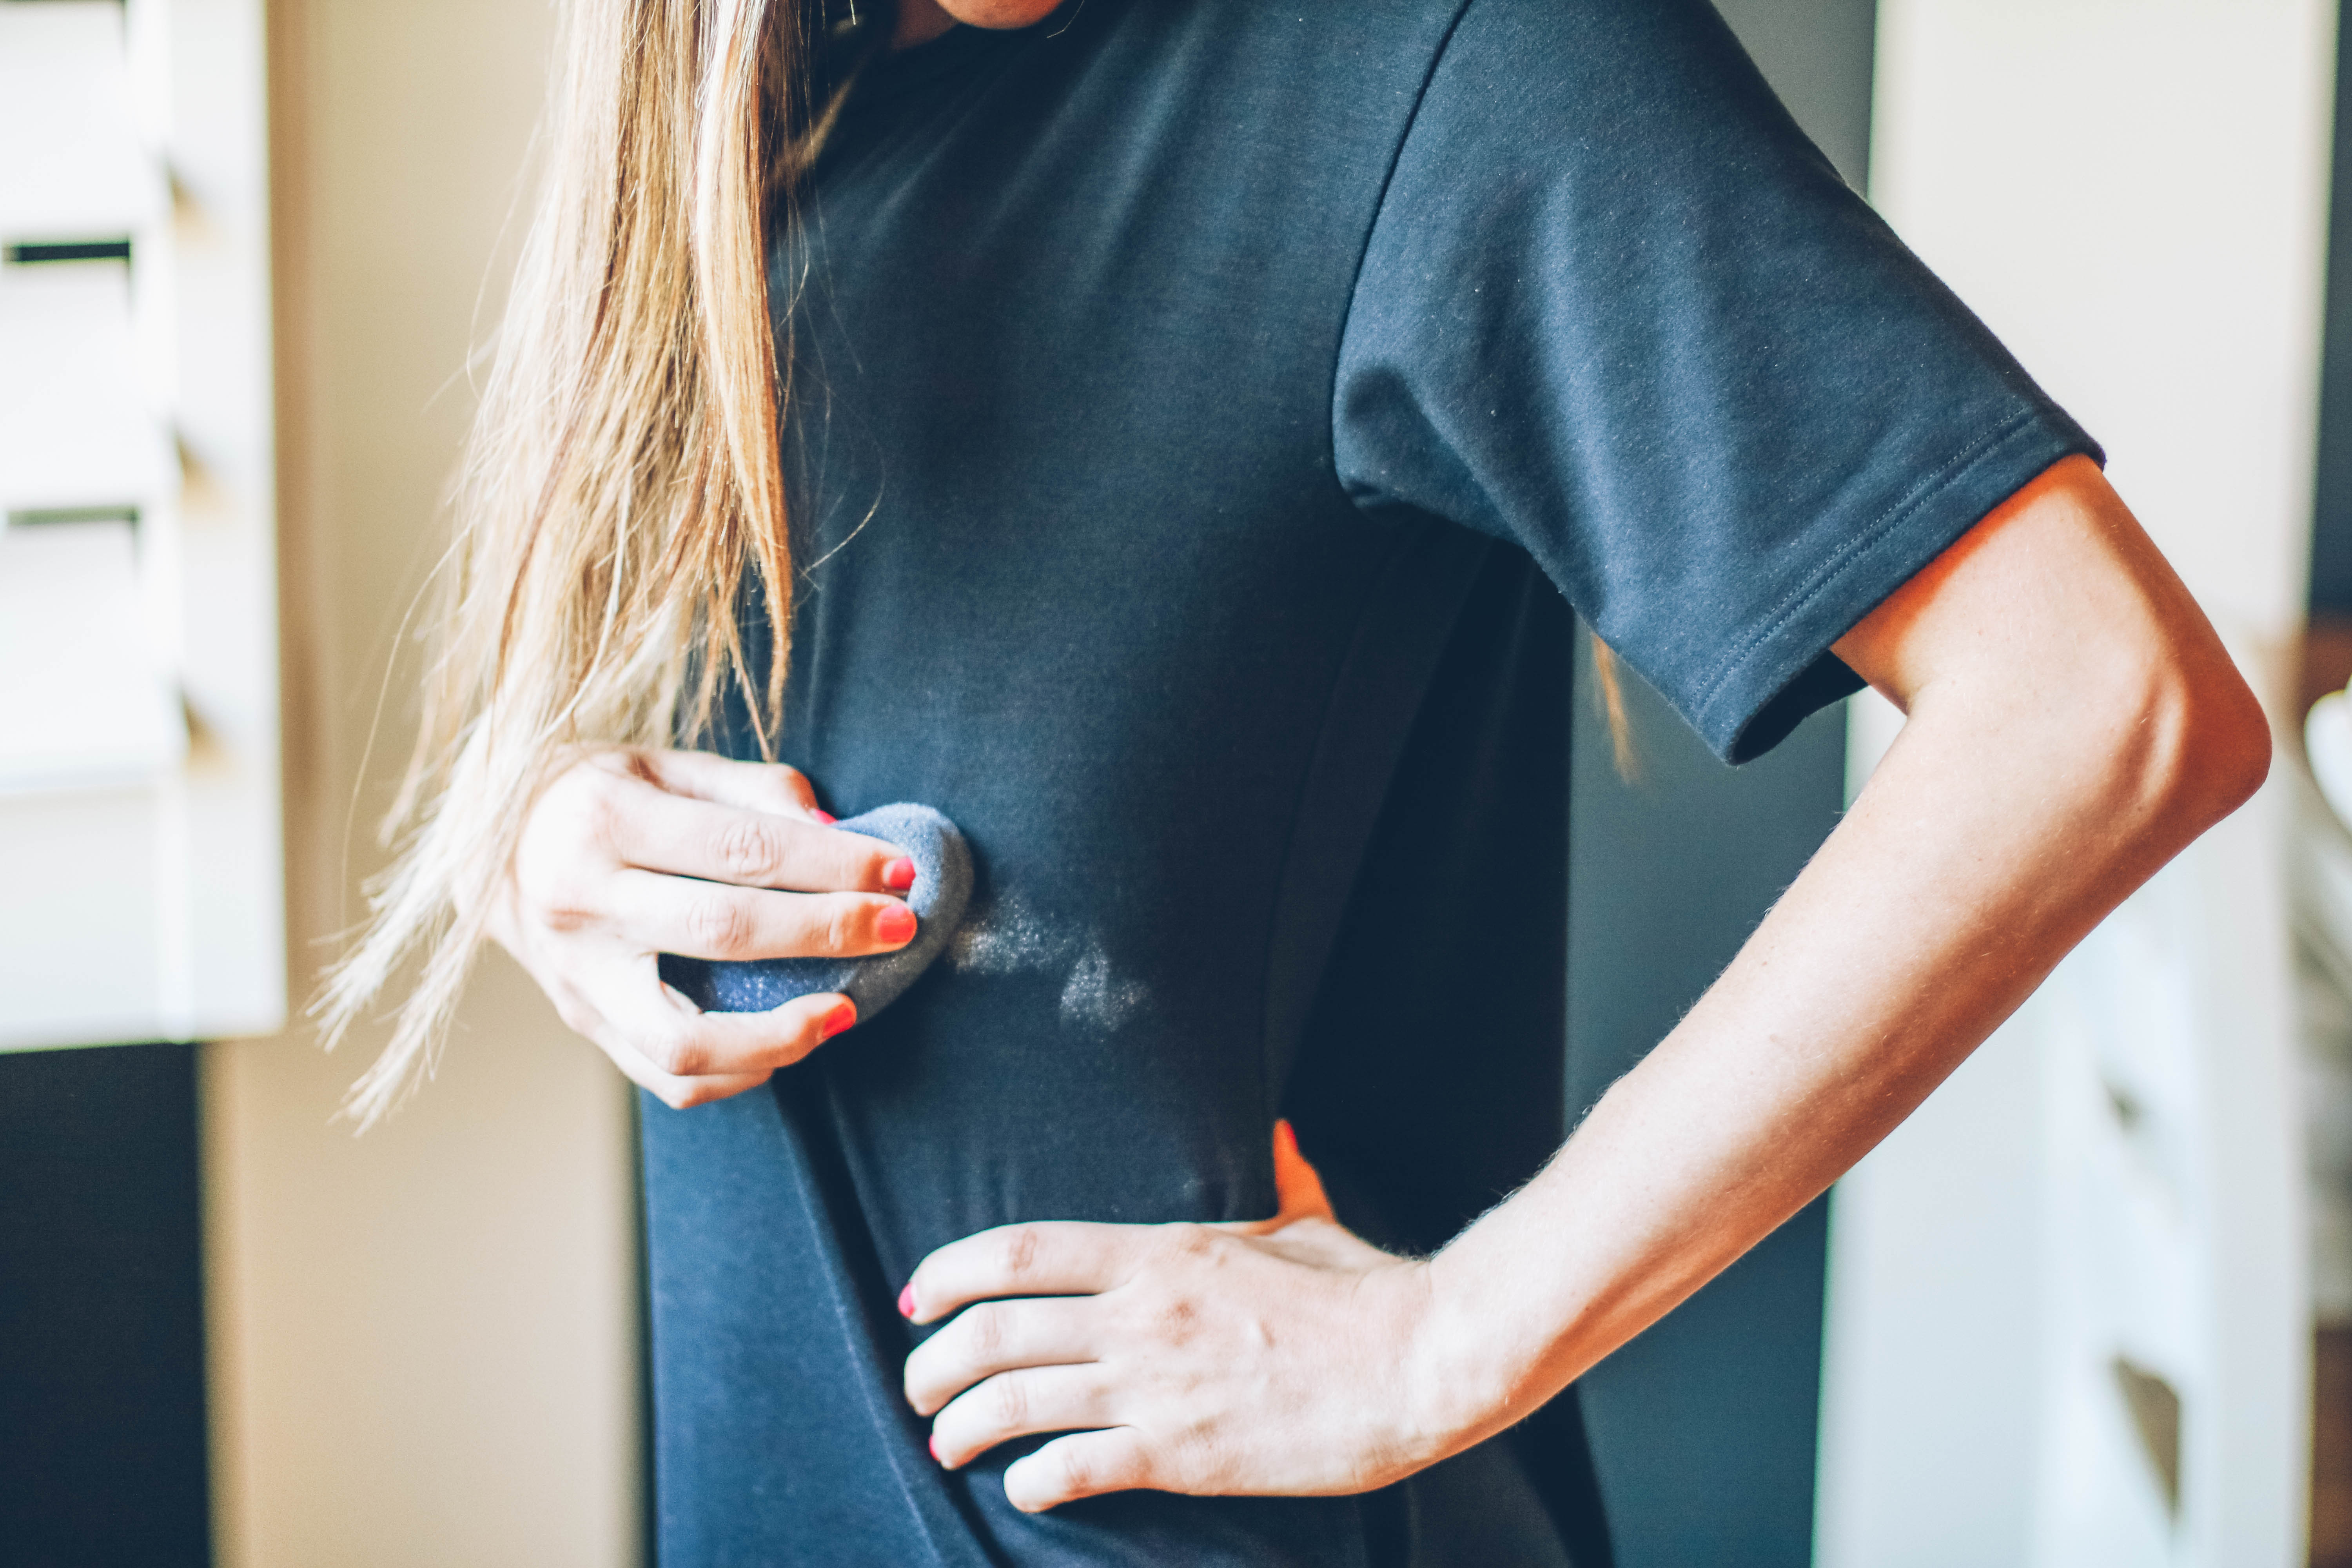 How To Mend A Seam With No Sewing! by popular Utah blogger Dani Marie